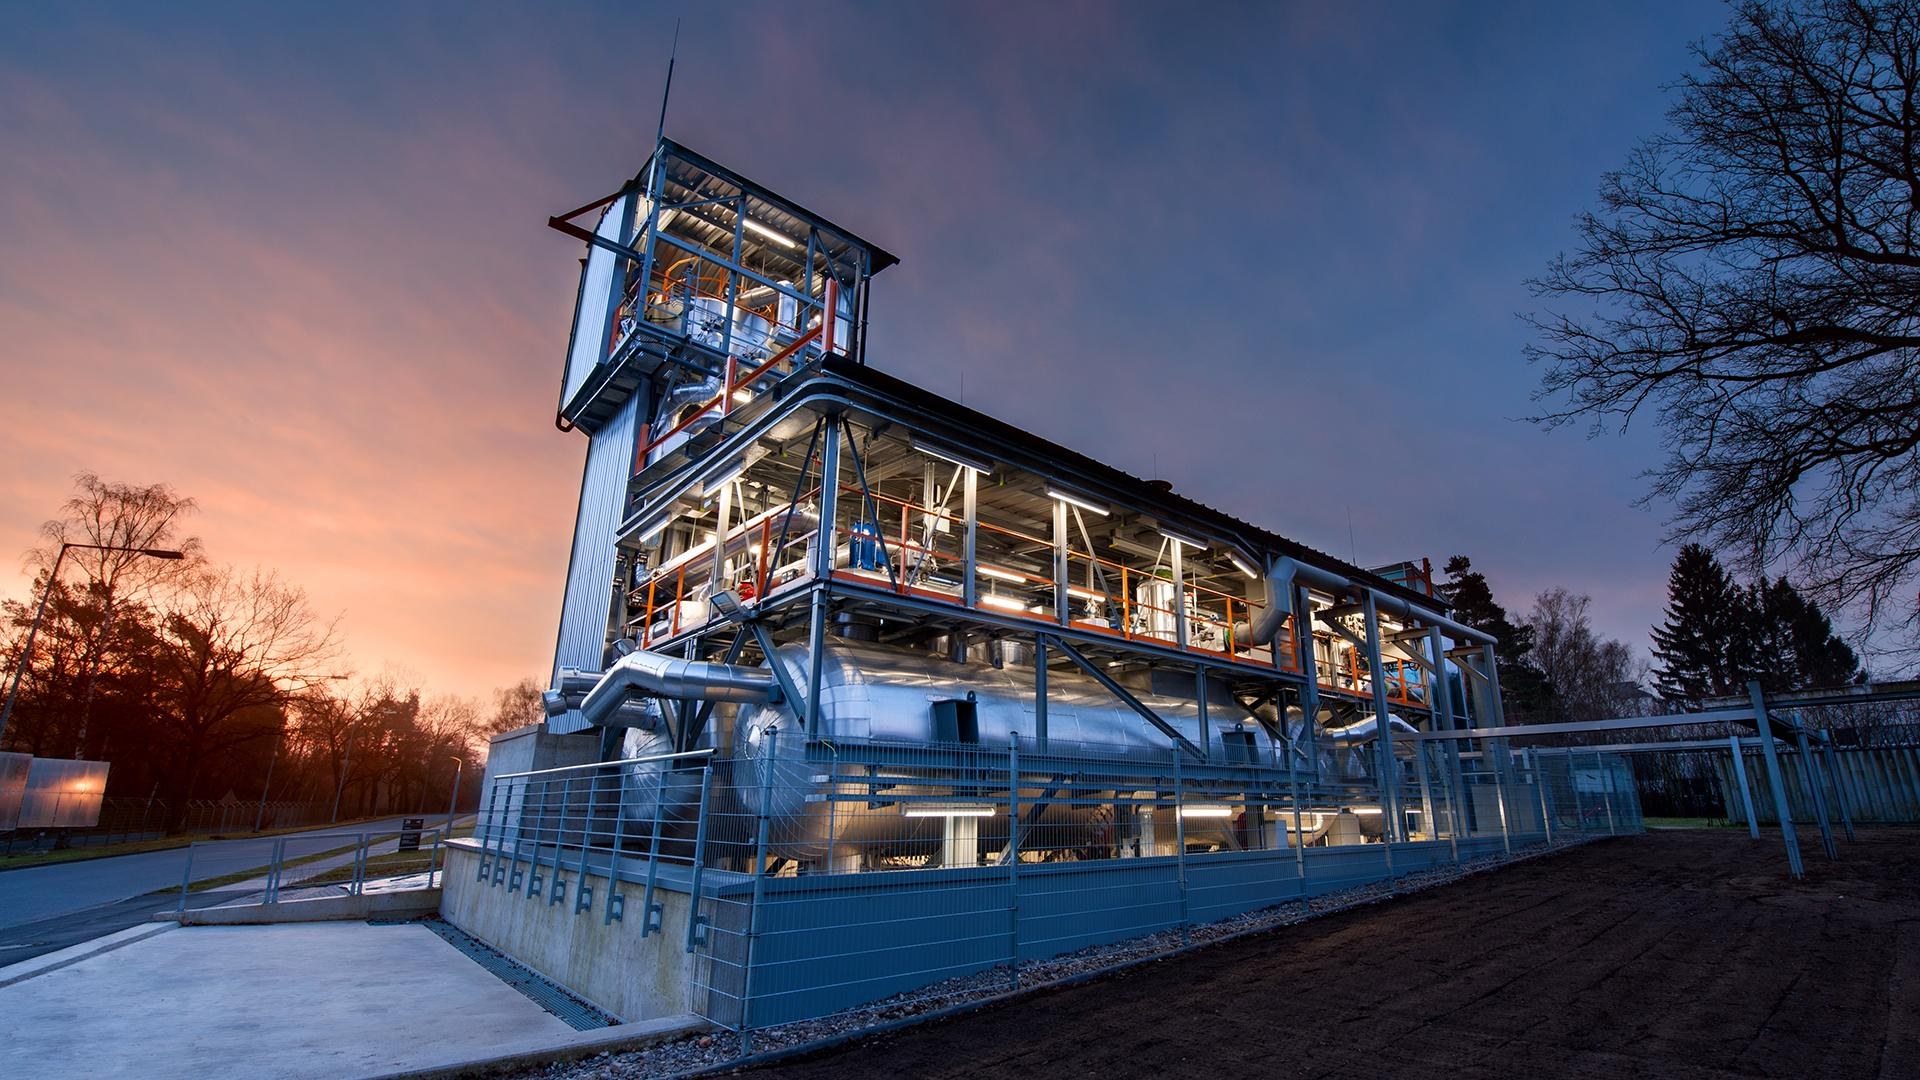 This large-scale research facility is used to develop and improve thermal storage capabilities and the molten salt technology that is used to store energy produced from renewable sources